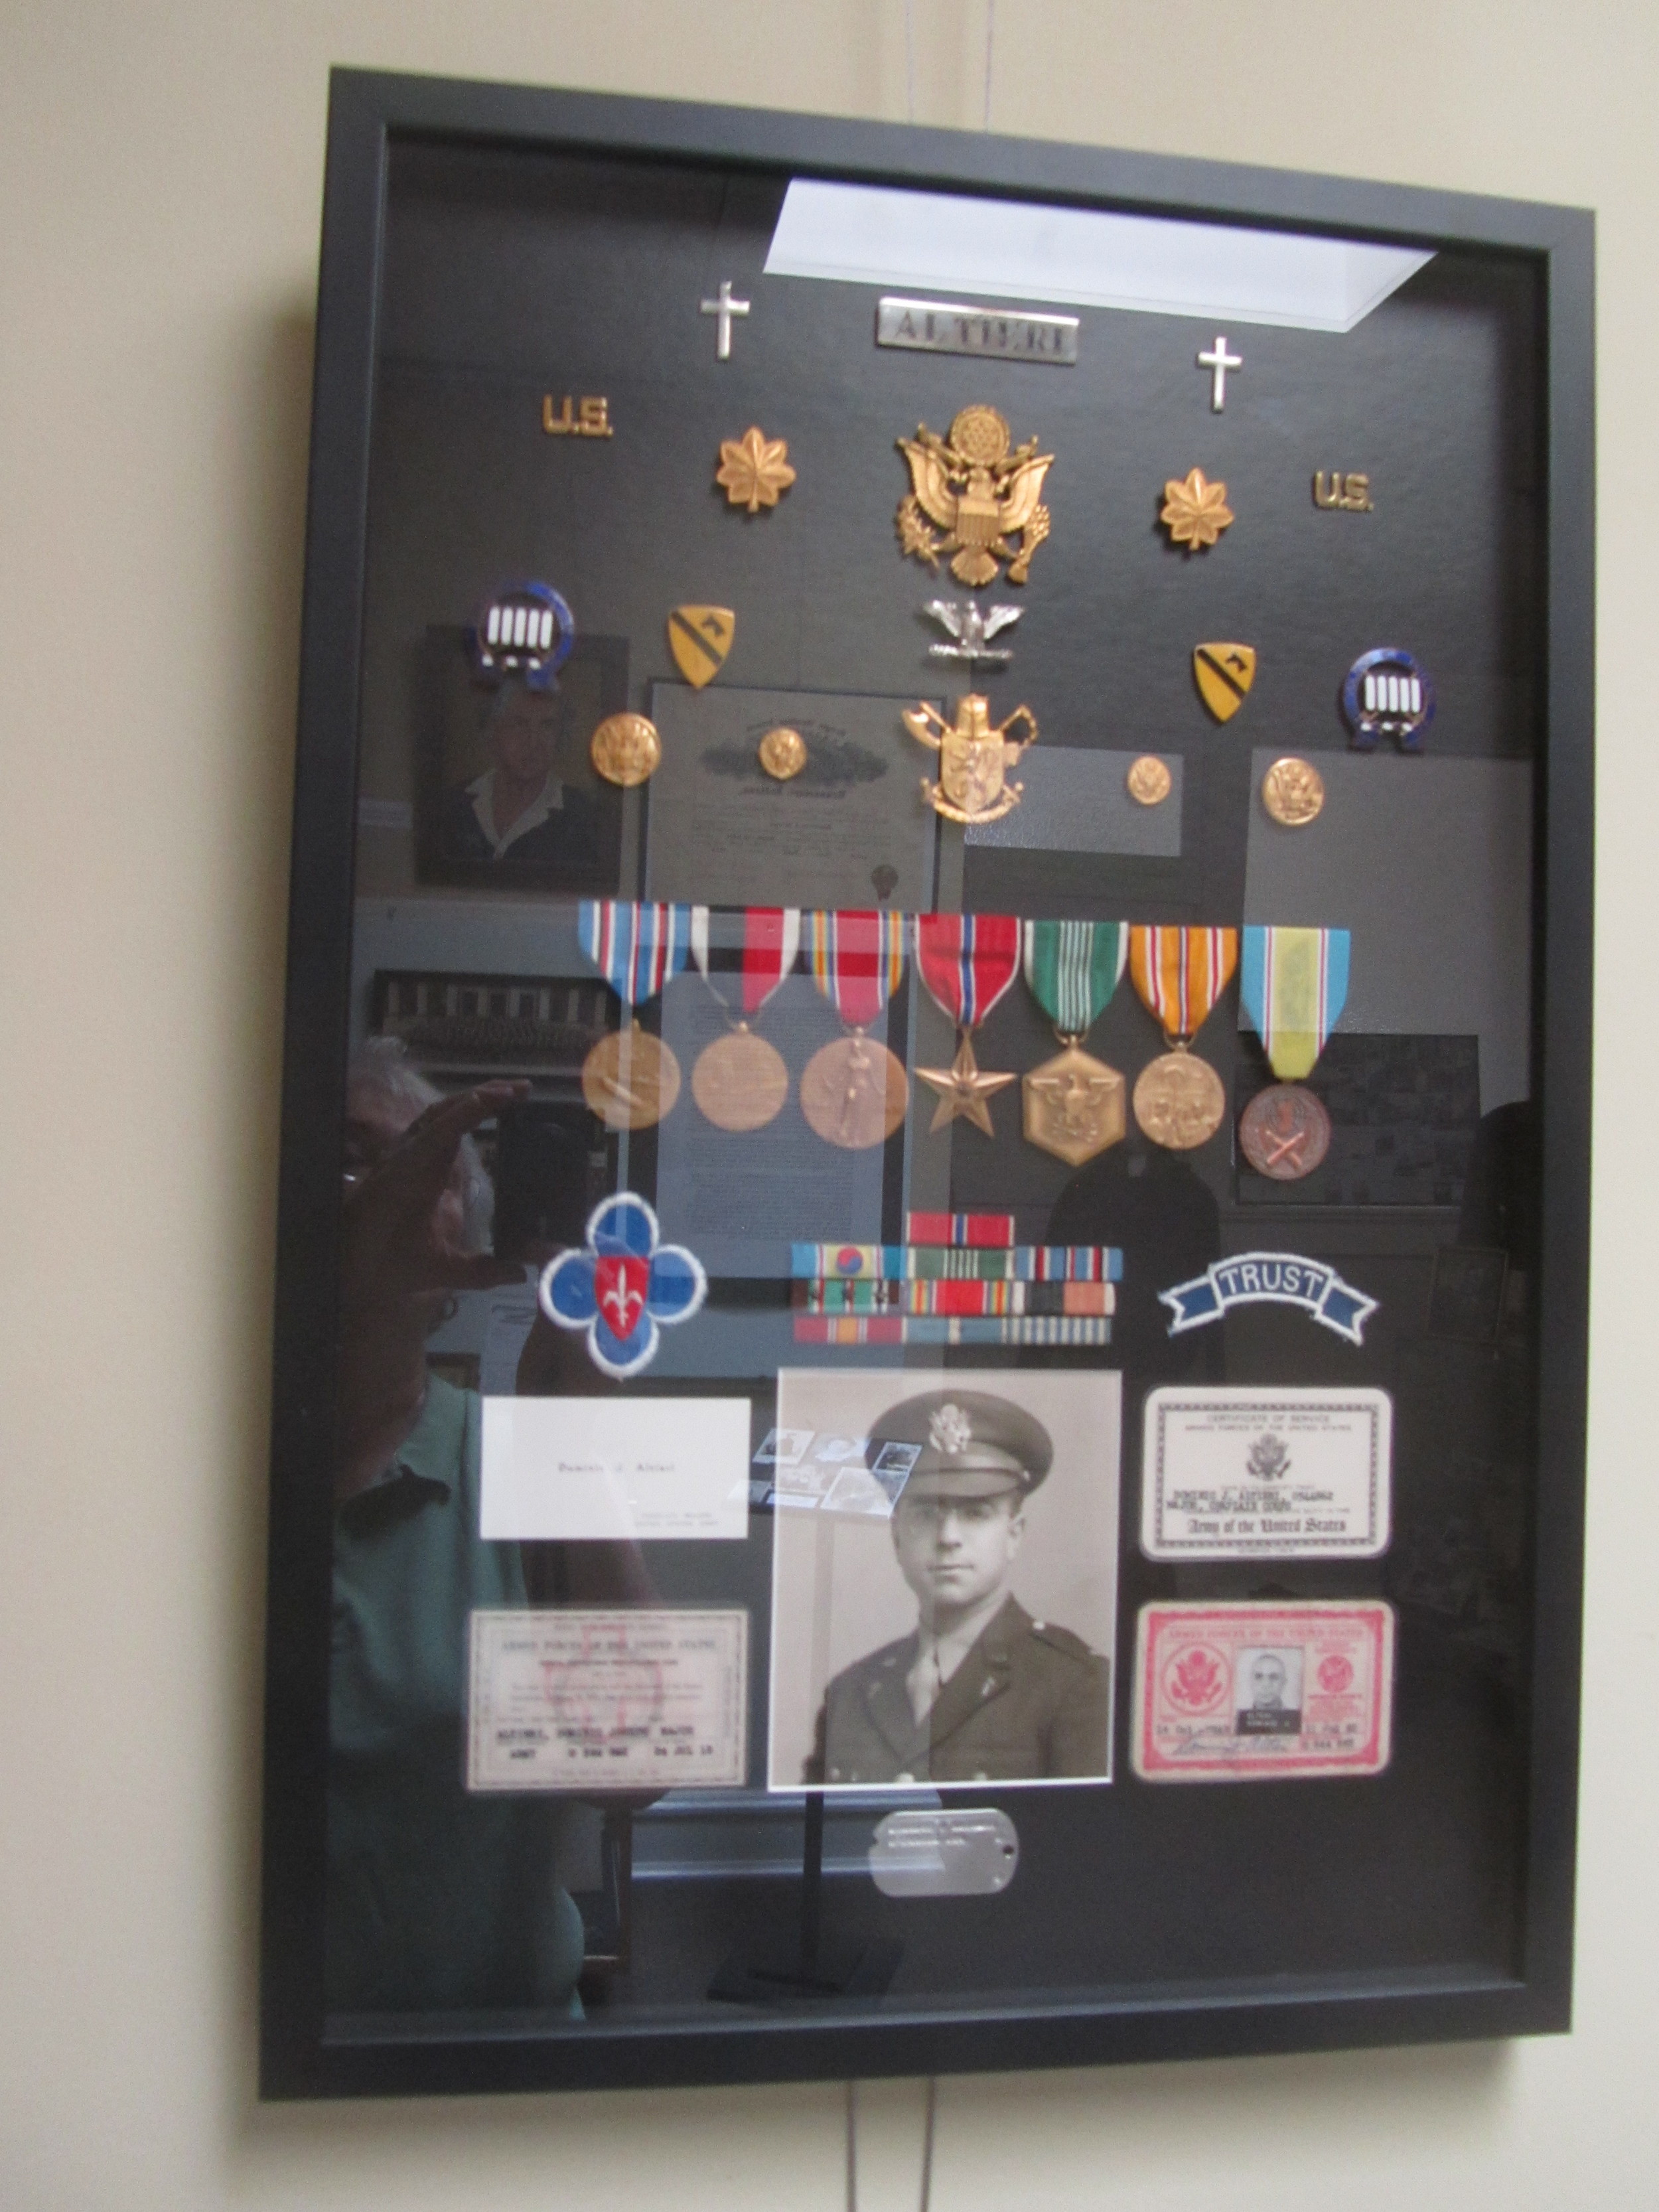  ​Just a few of the many medals Rev. Altieri received in service to both America and to mankind during his time in the Army. 